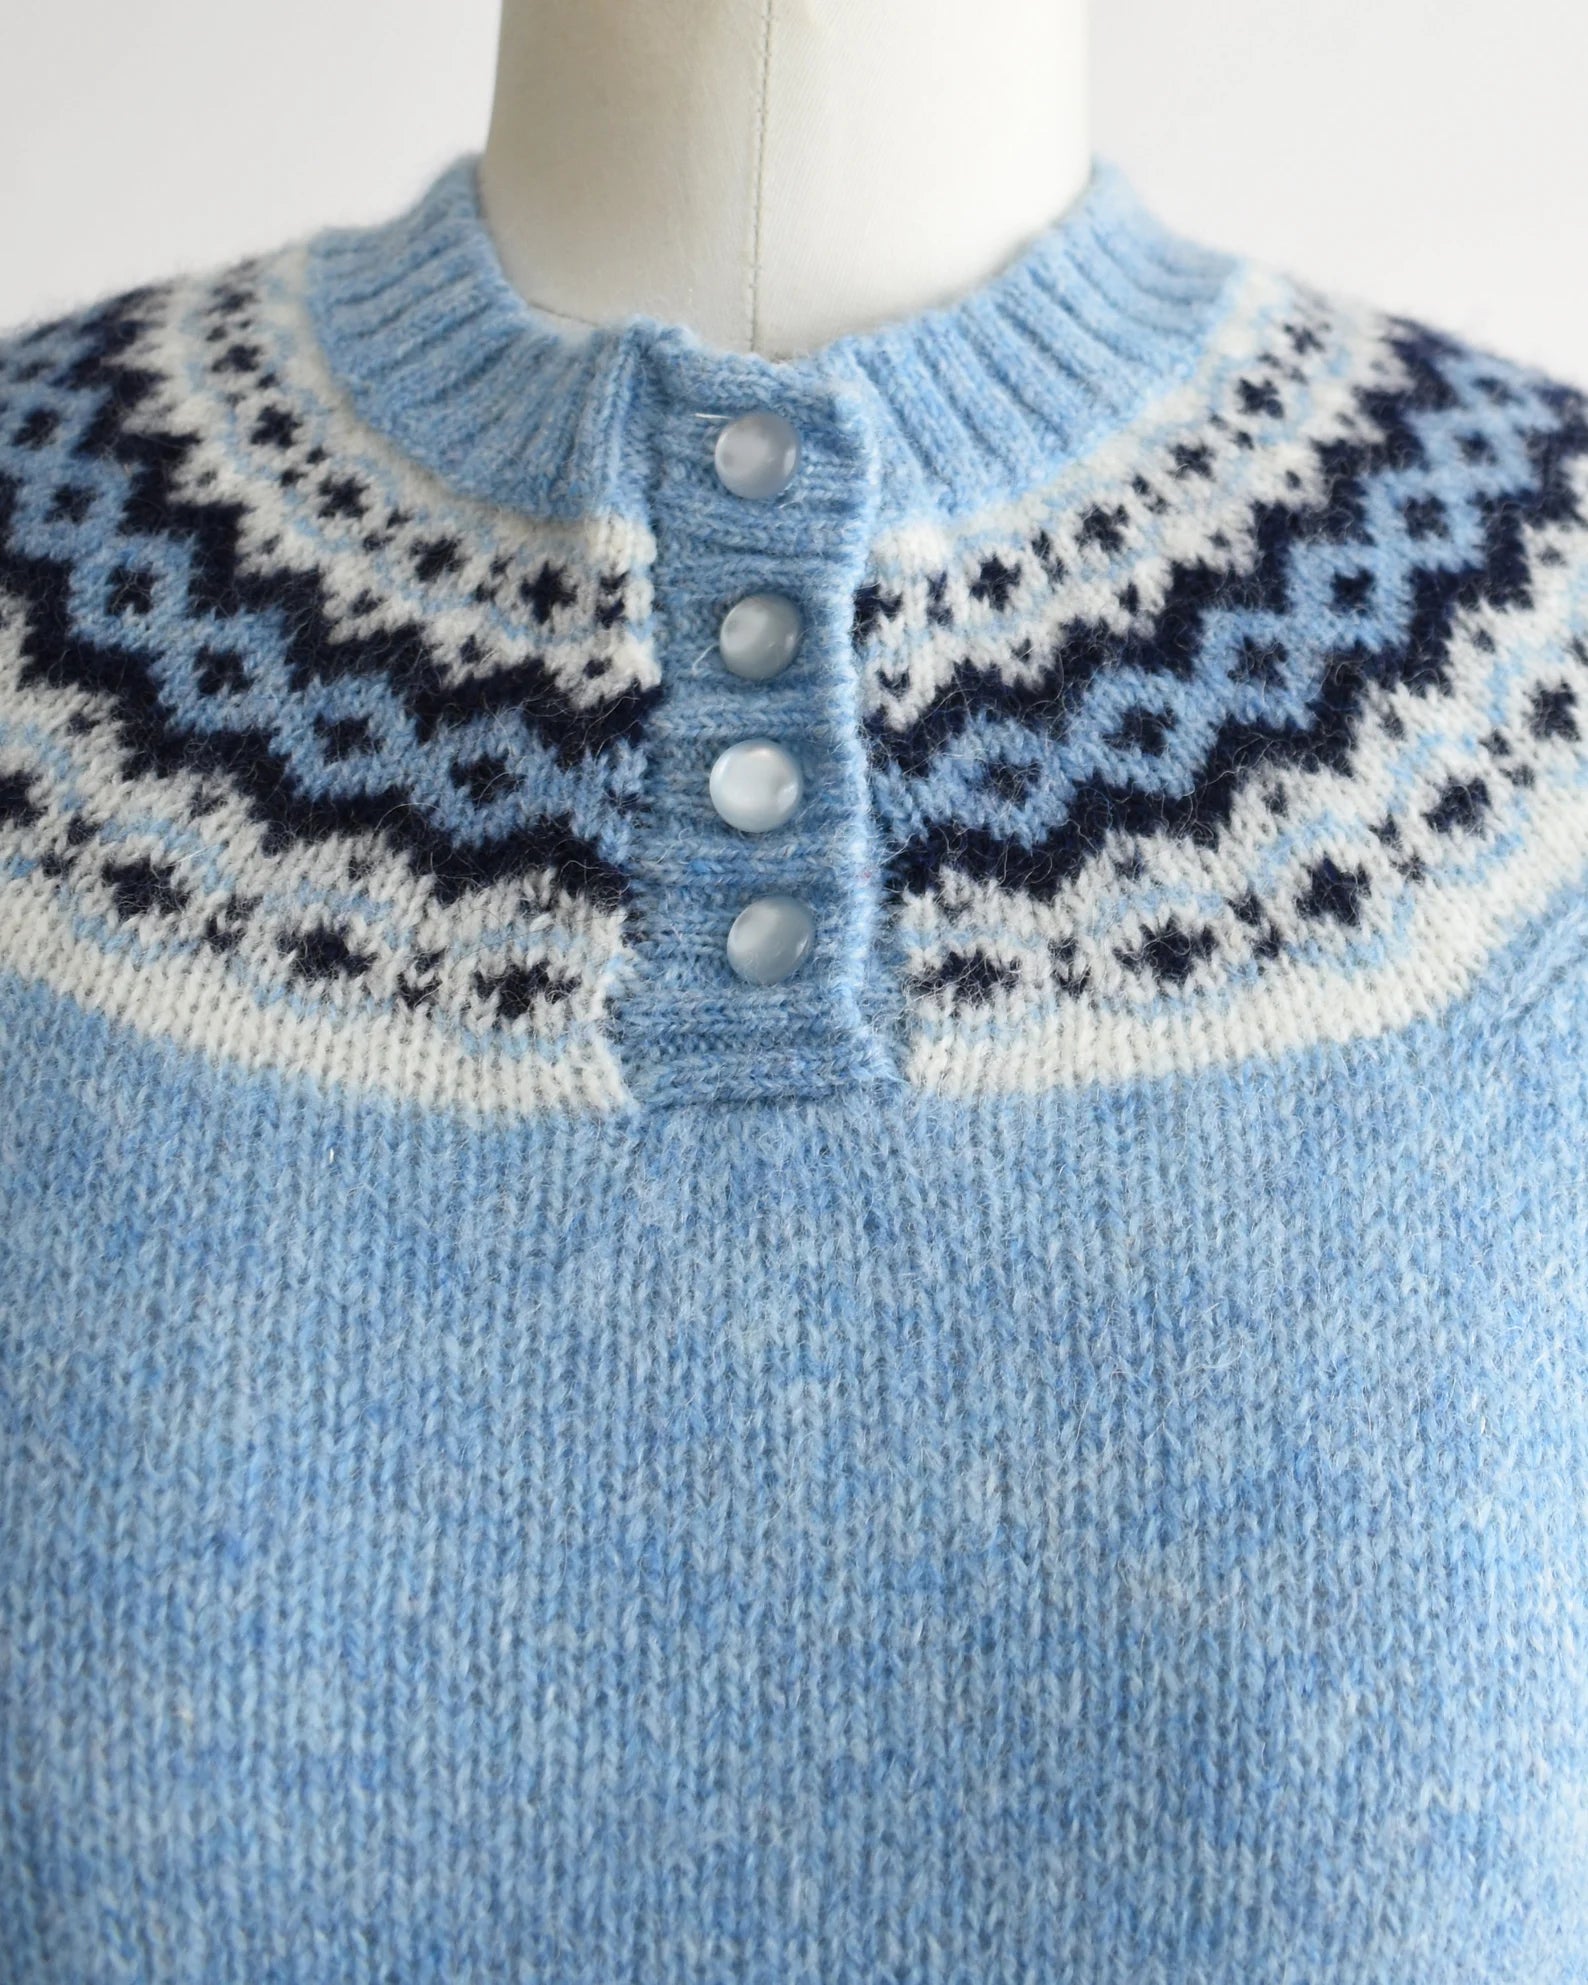 Close up of the fair isle pattern around the collar and 4 buttons down the front. The sweater is modeled on a dress form.